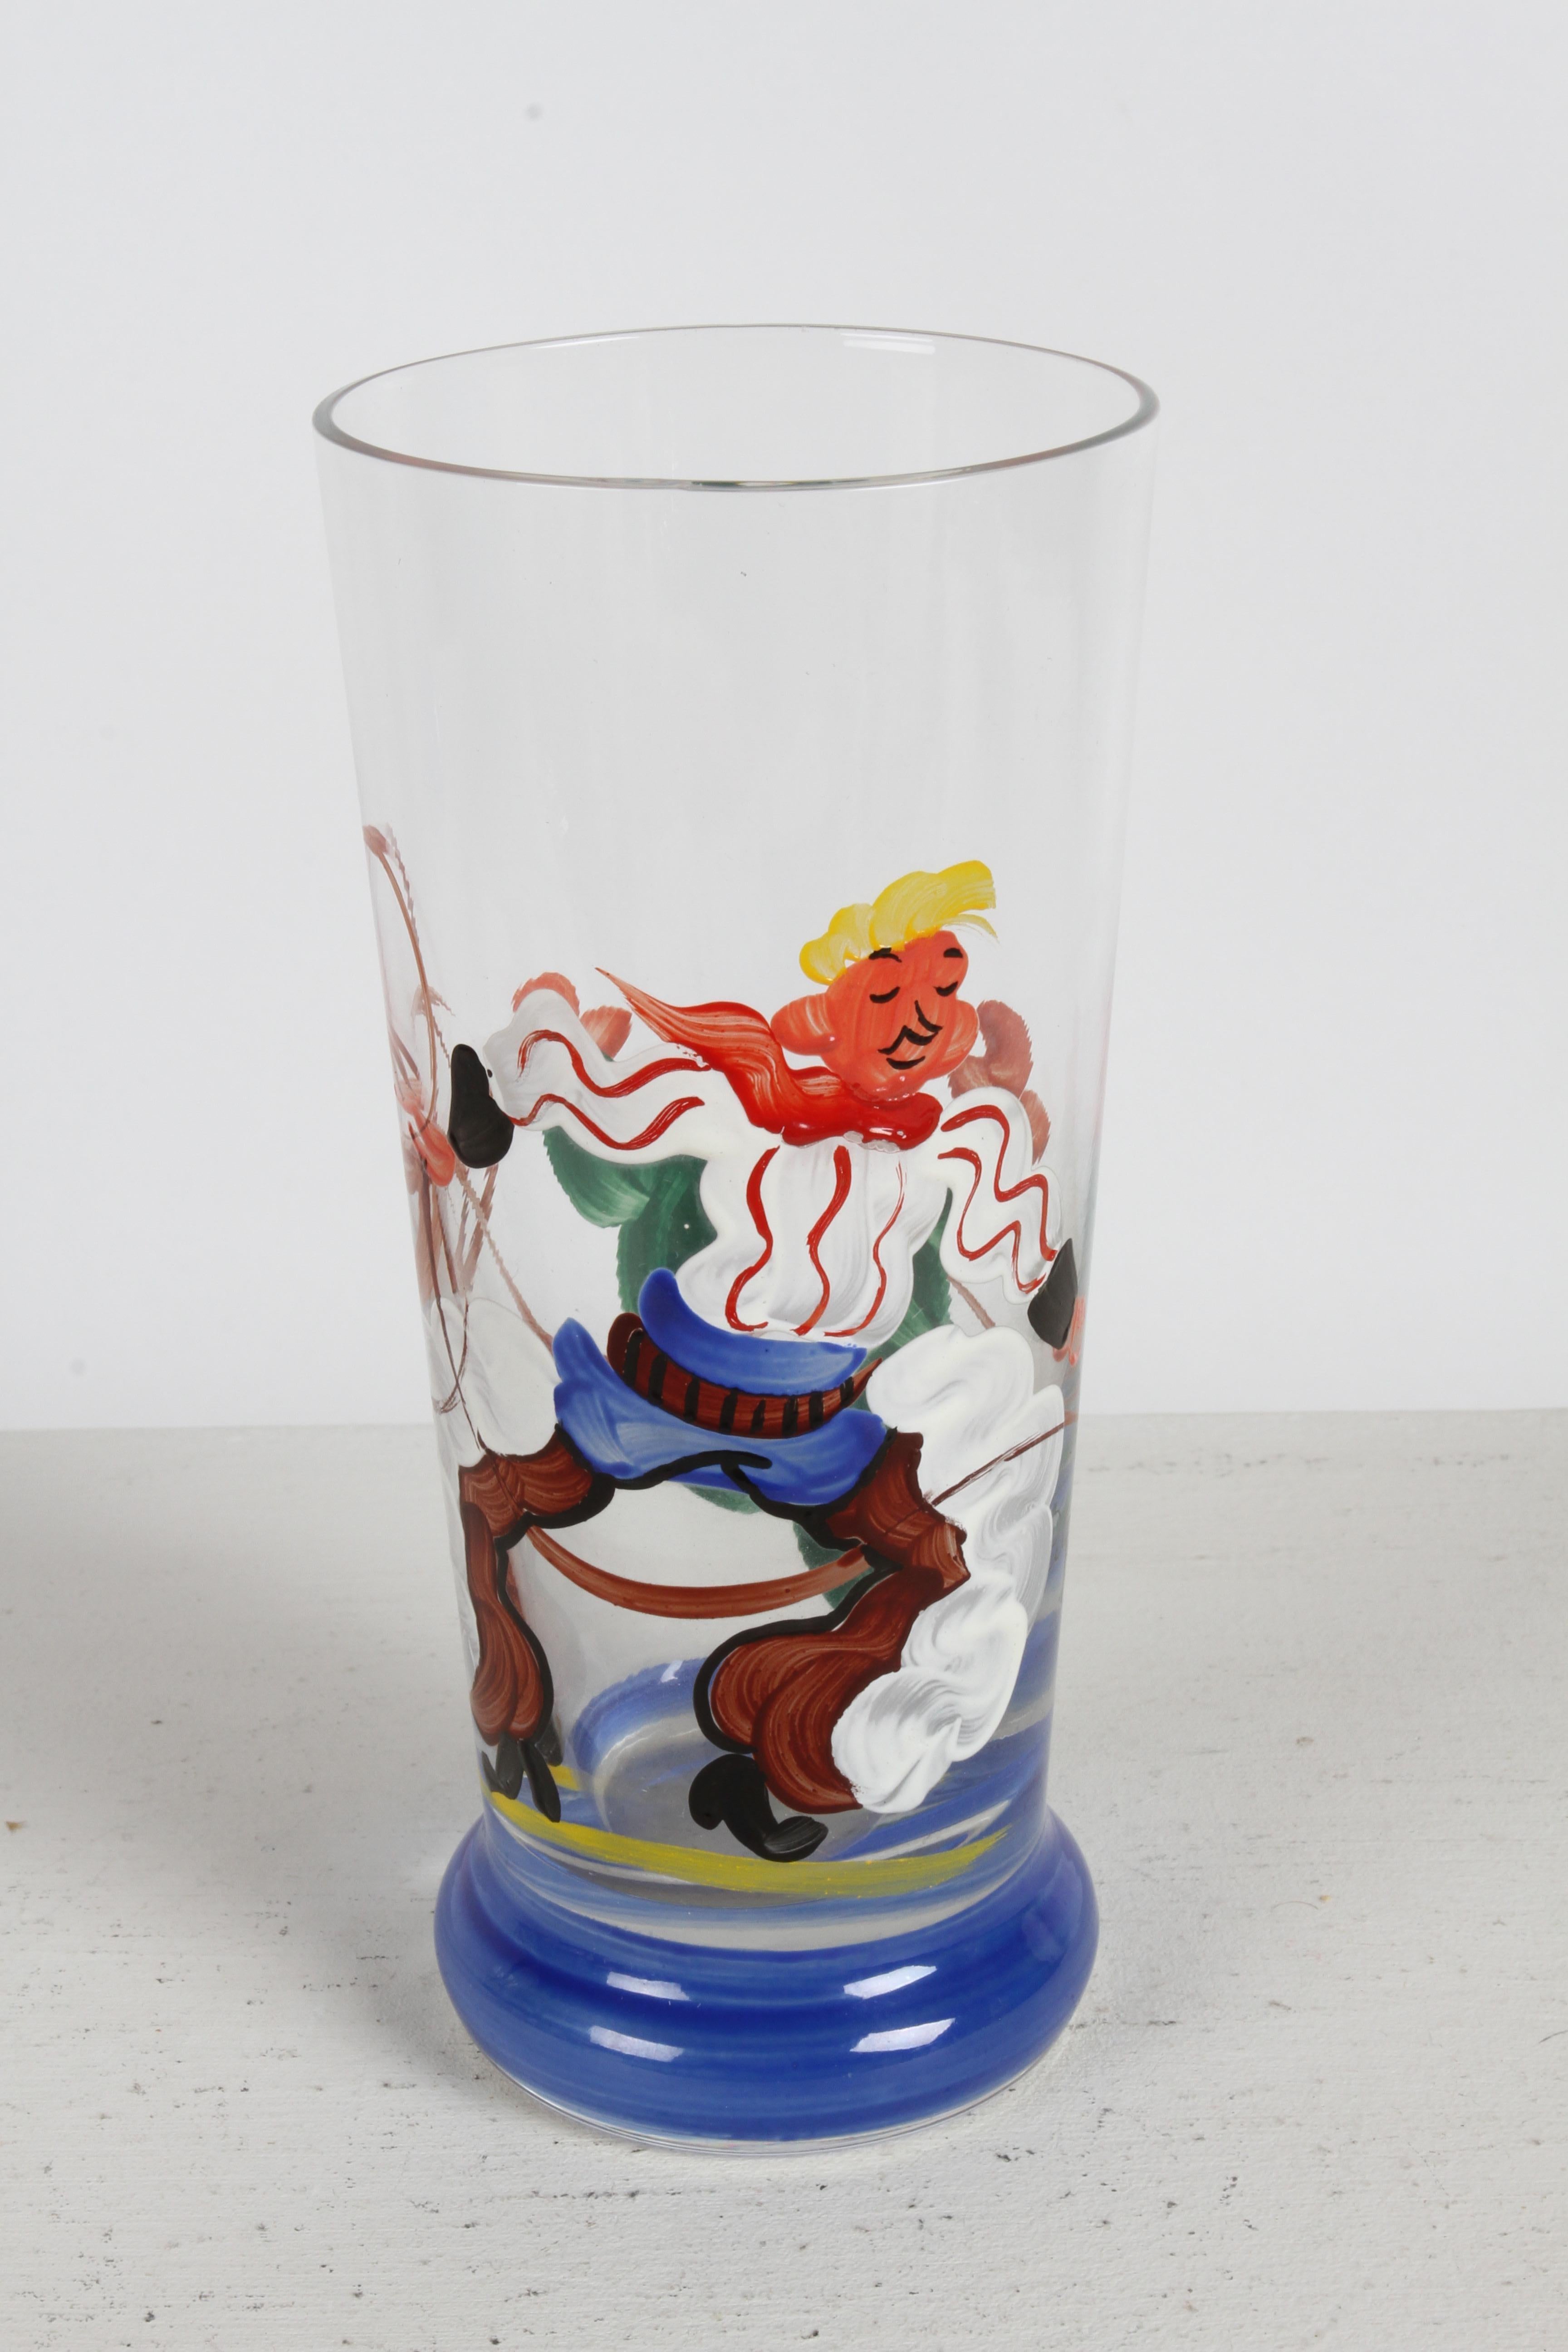 Mid-20th Century 1940s Artist Hand-Painted Bar Glasses with Cowboy, Lasso & Cactus Theme - Rita  For Sale